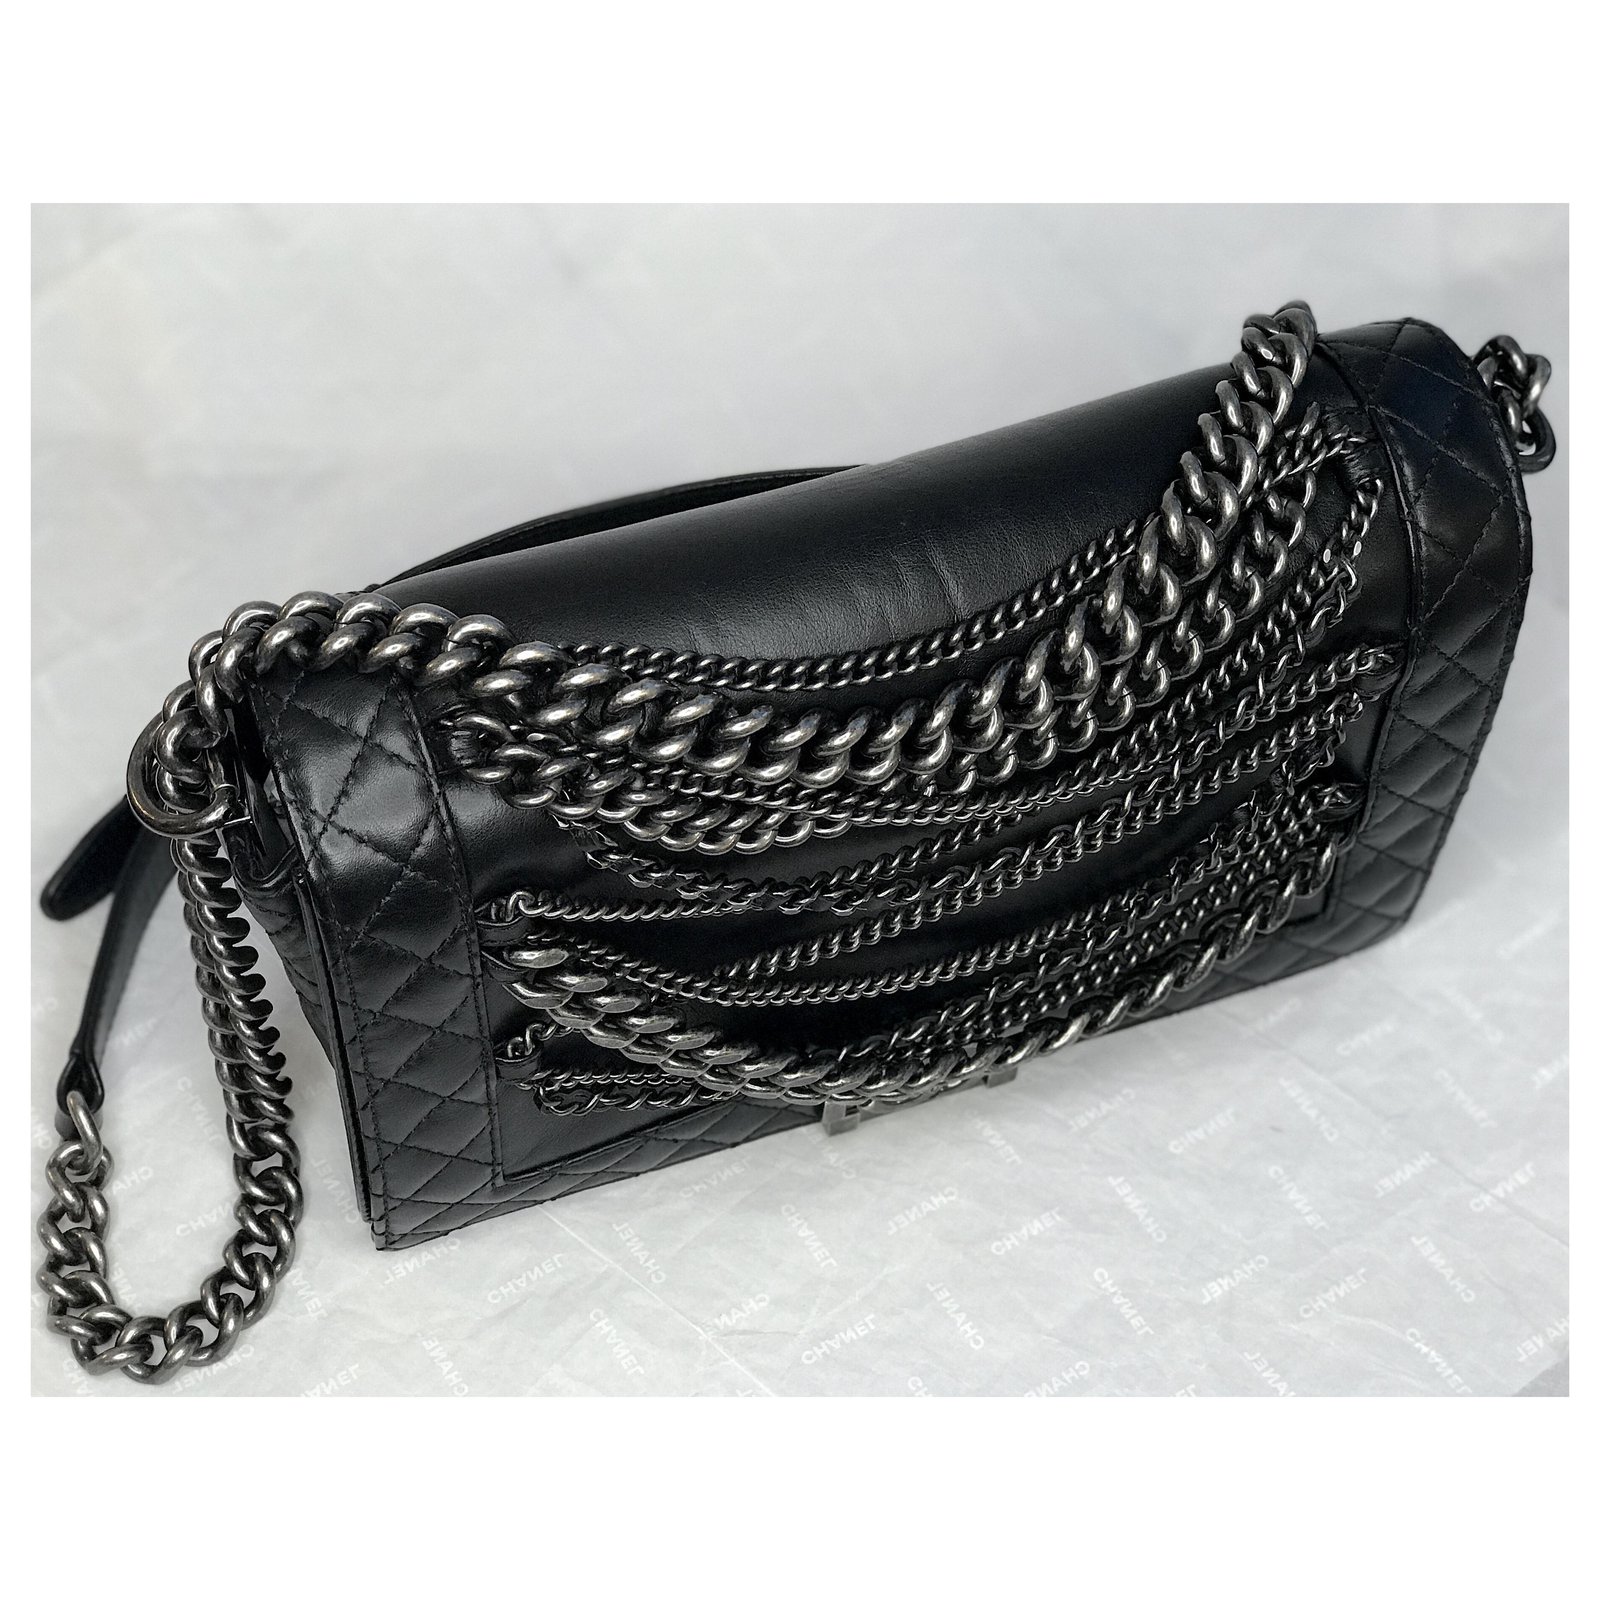 Chanel Black Smooth Lambskin Leather Multi Chains Large Boy Bag